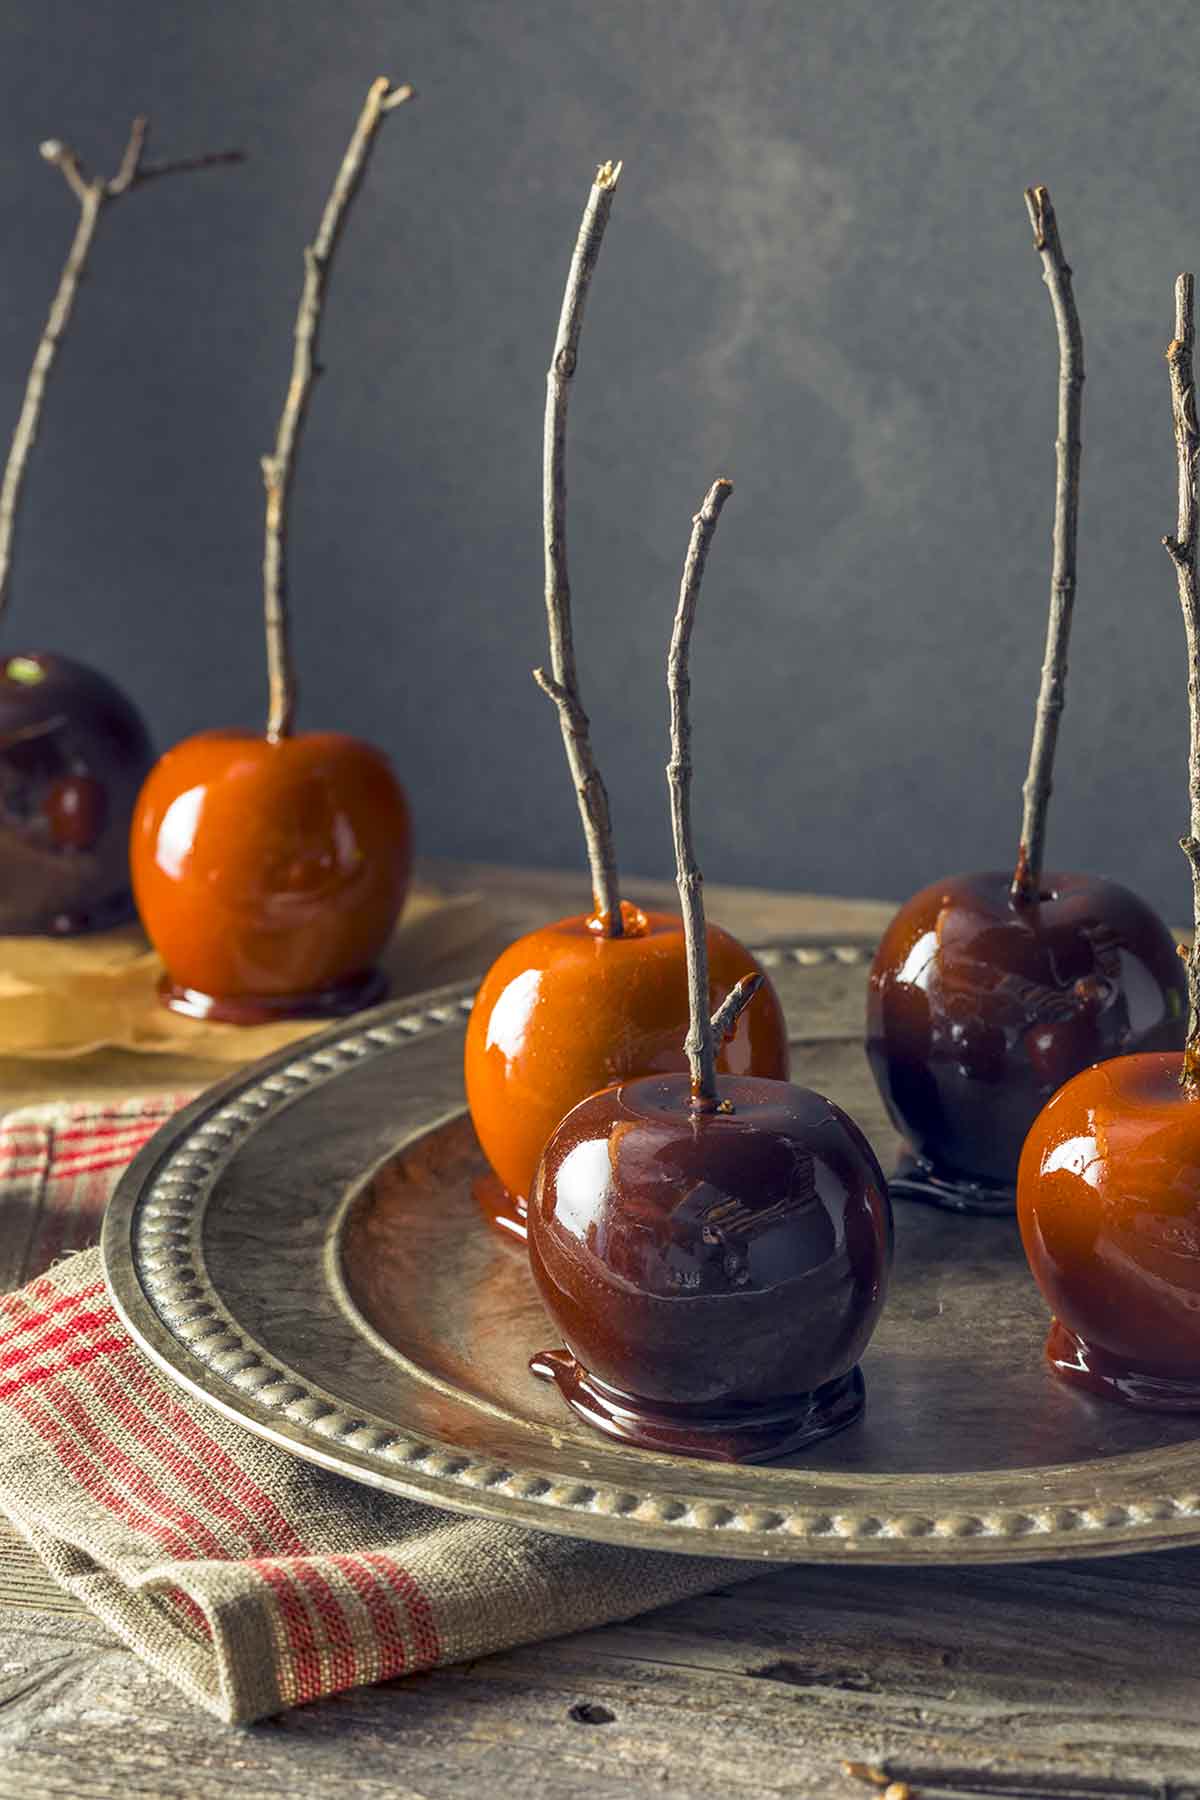 Caramel apples on a silver tray with wooden branches as handles.